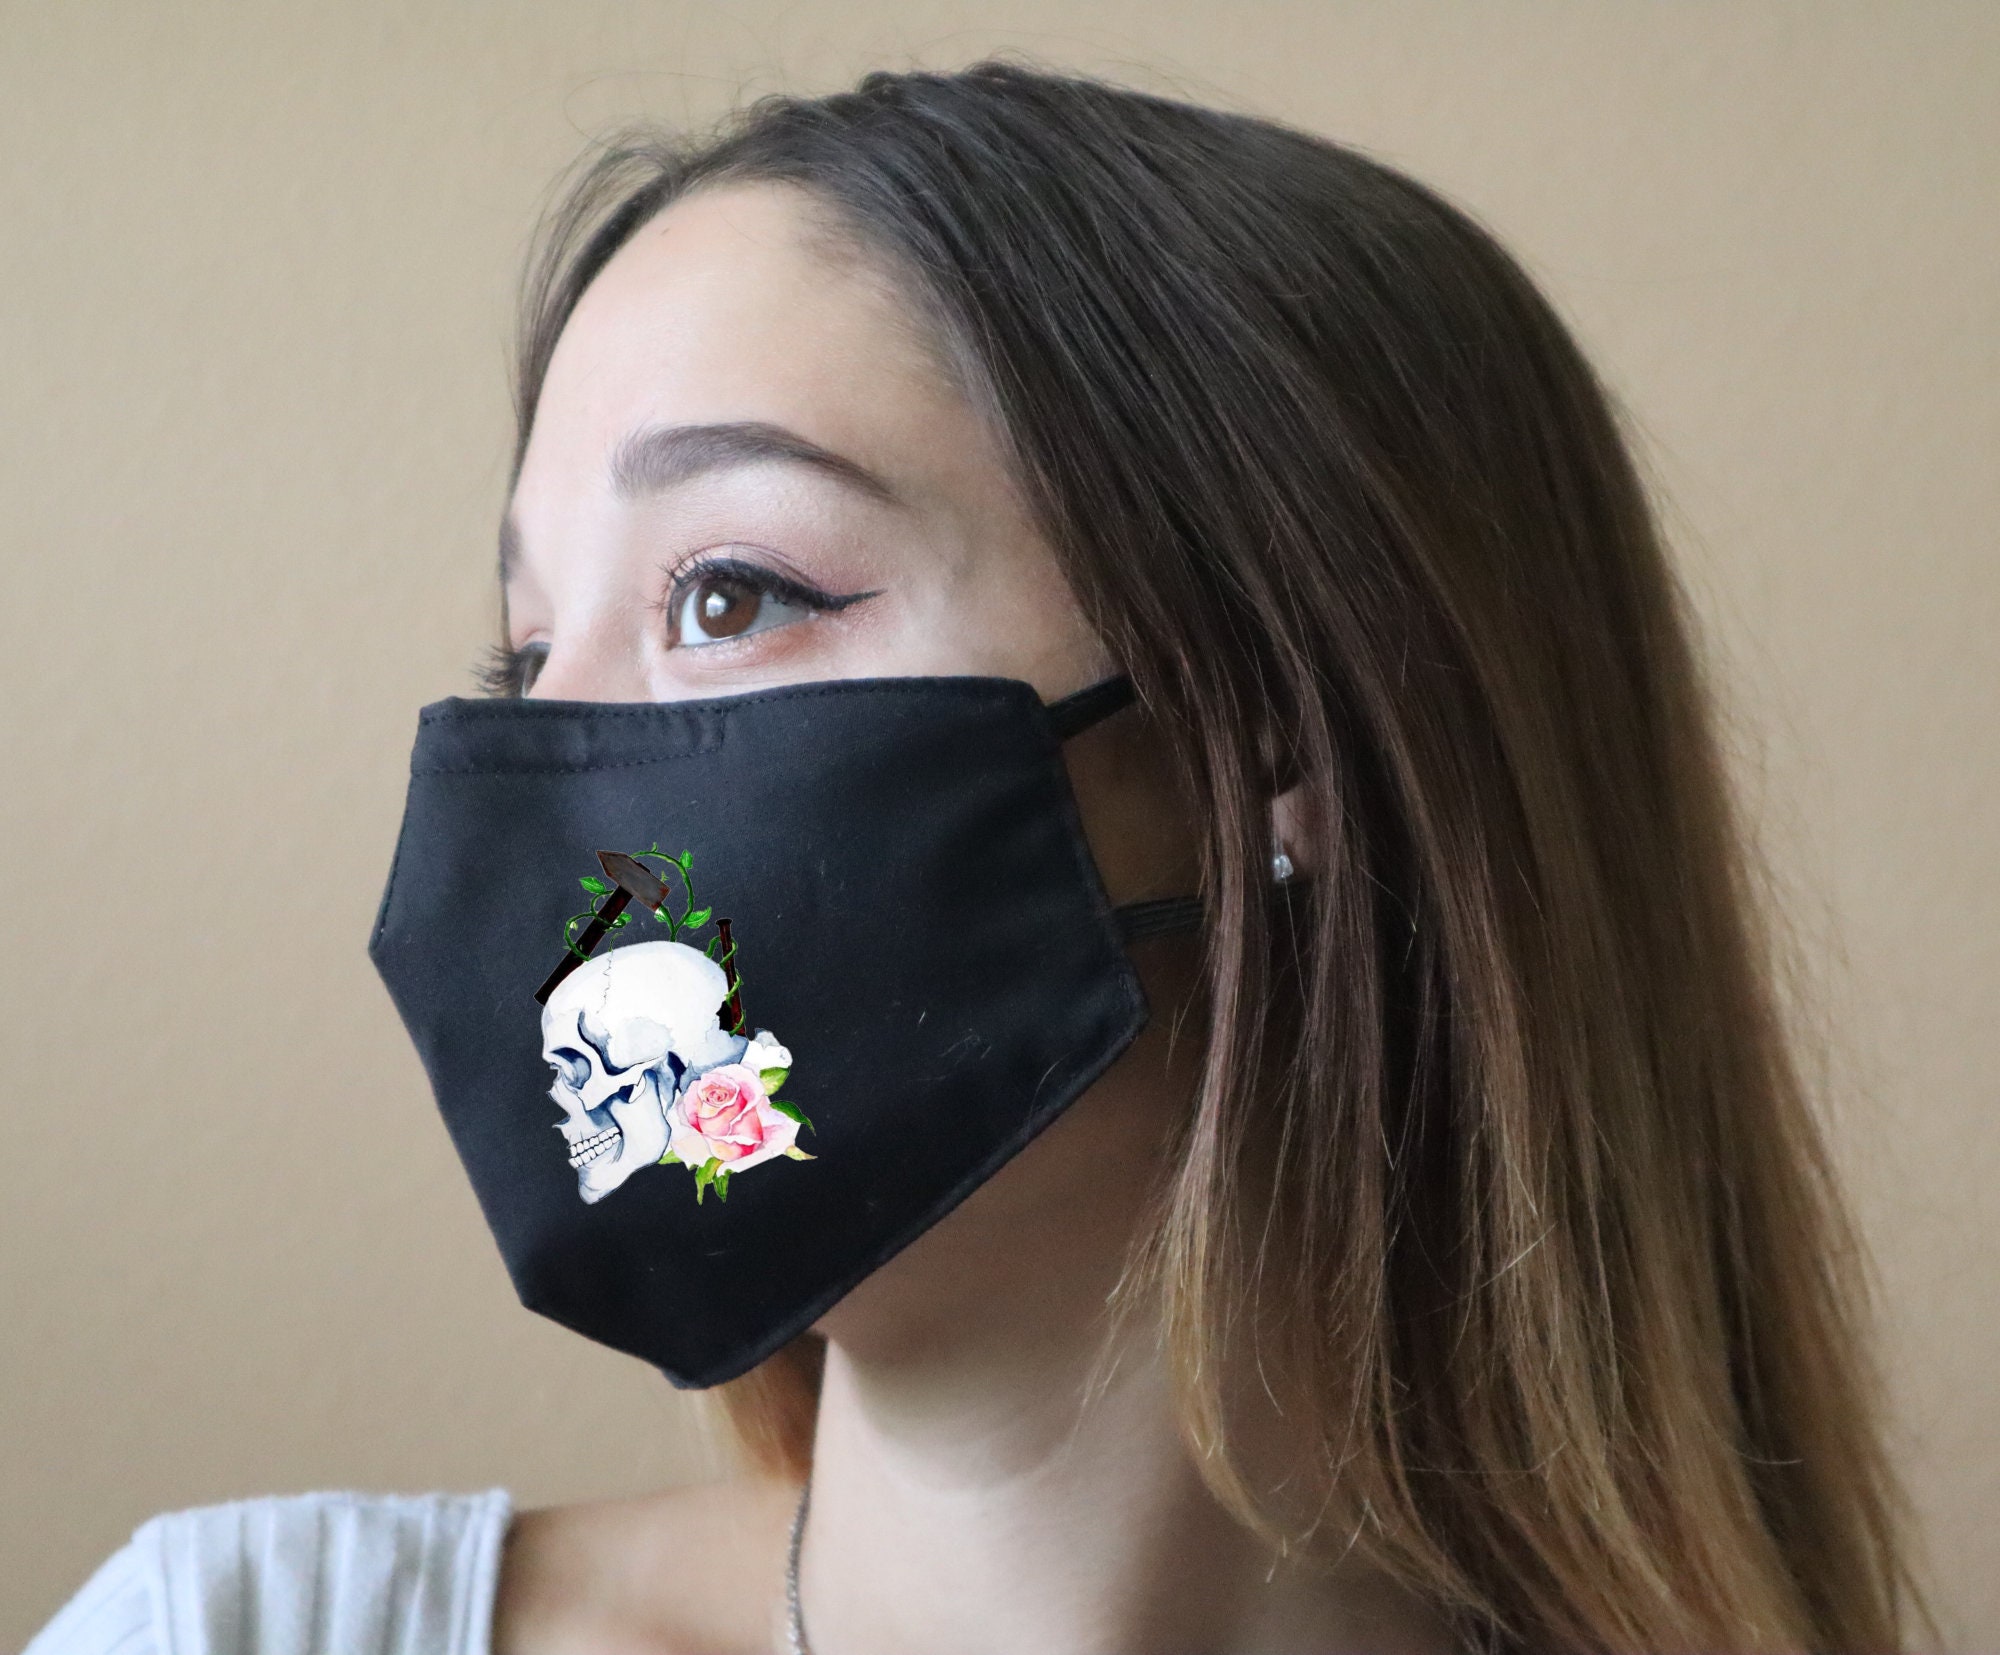 Handmade Cotton Blend Customizable Face Masks With Adjustable Ear Loops - Skull & Rose